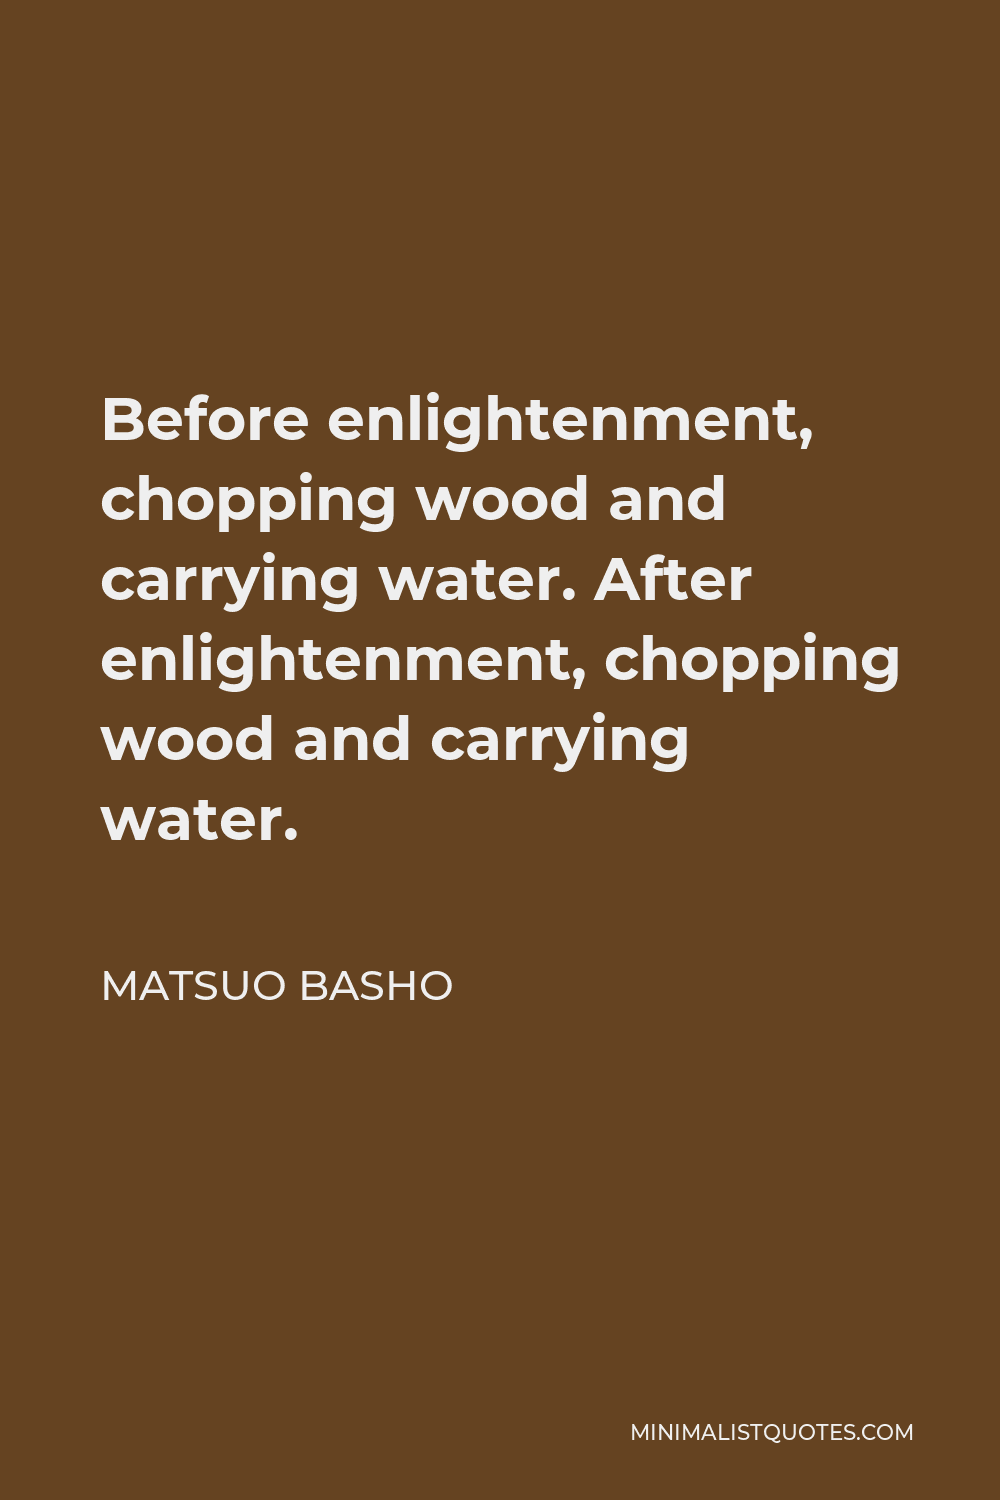 Matsuo Basho Quote - Before enlightenment, chopping wood and carrying water. After enlightenment, chopping wood and carrying water.